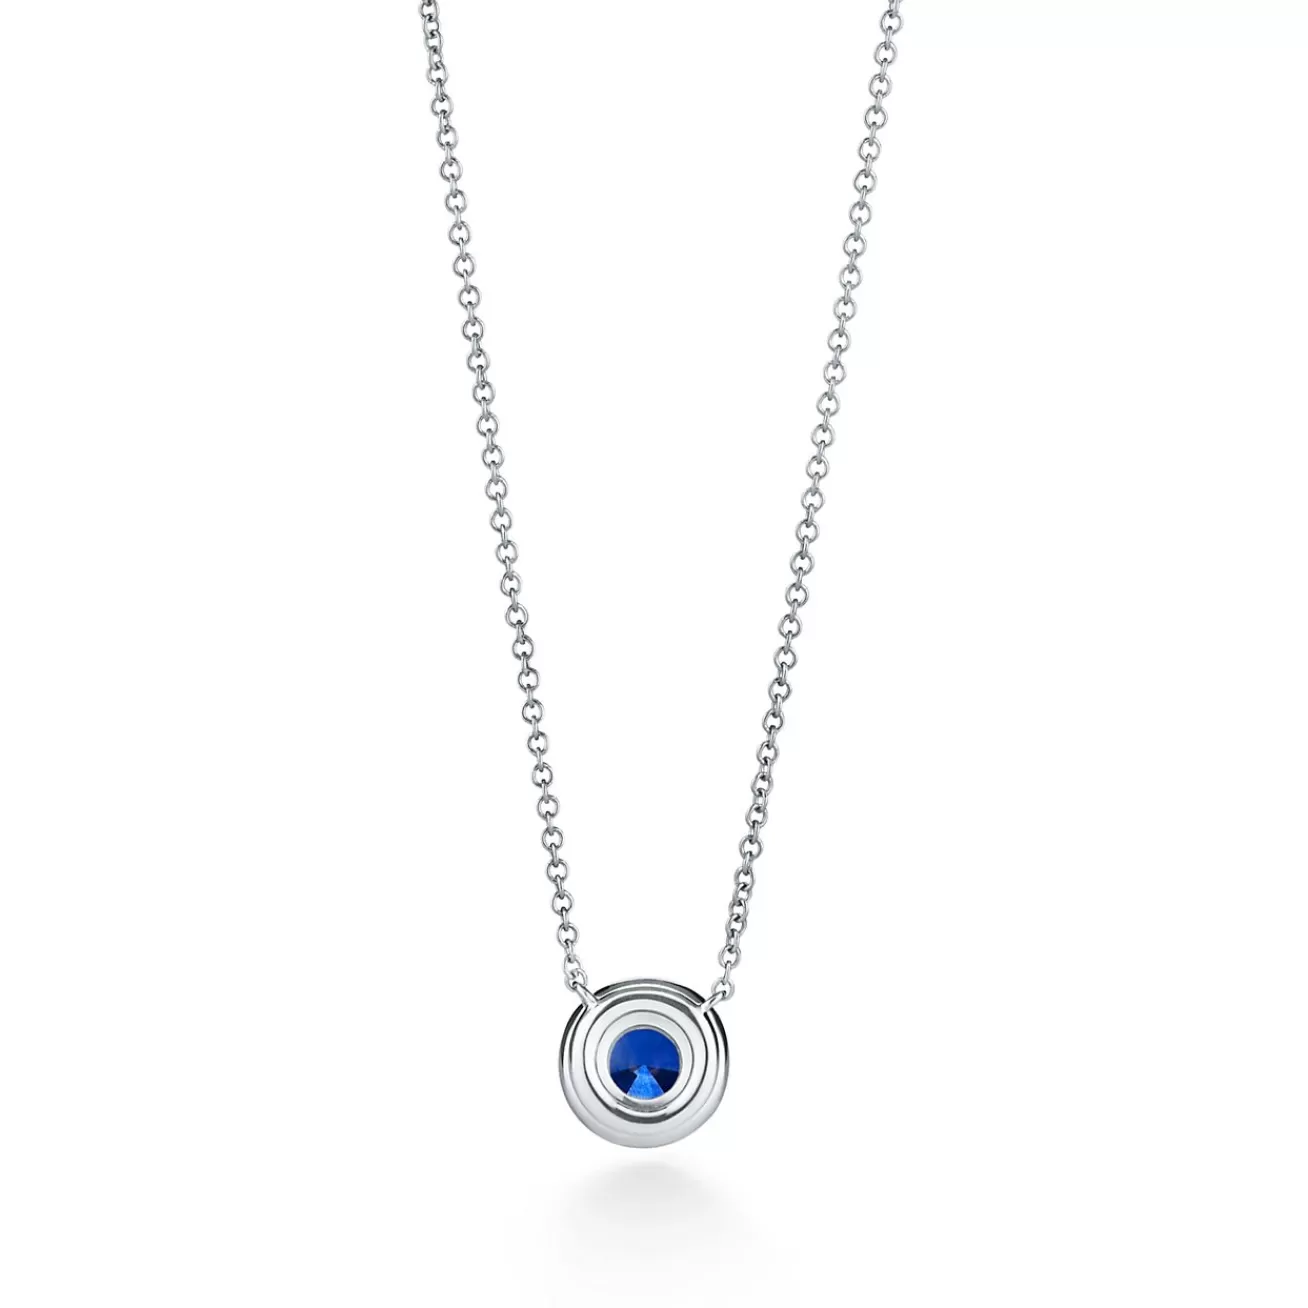 Tiffany & Co. Tiffany Soleste® pendant in platinum with a sapphire and diamonds. | ^ Necklaces & Pendants | Gifts for Her